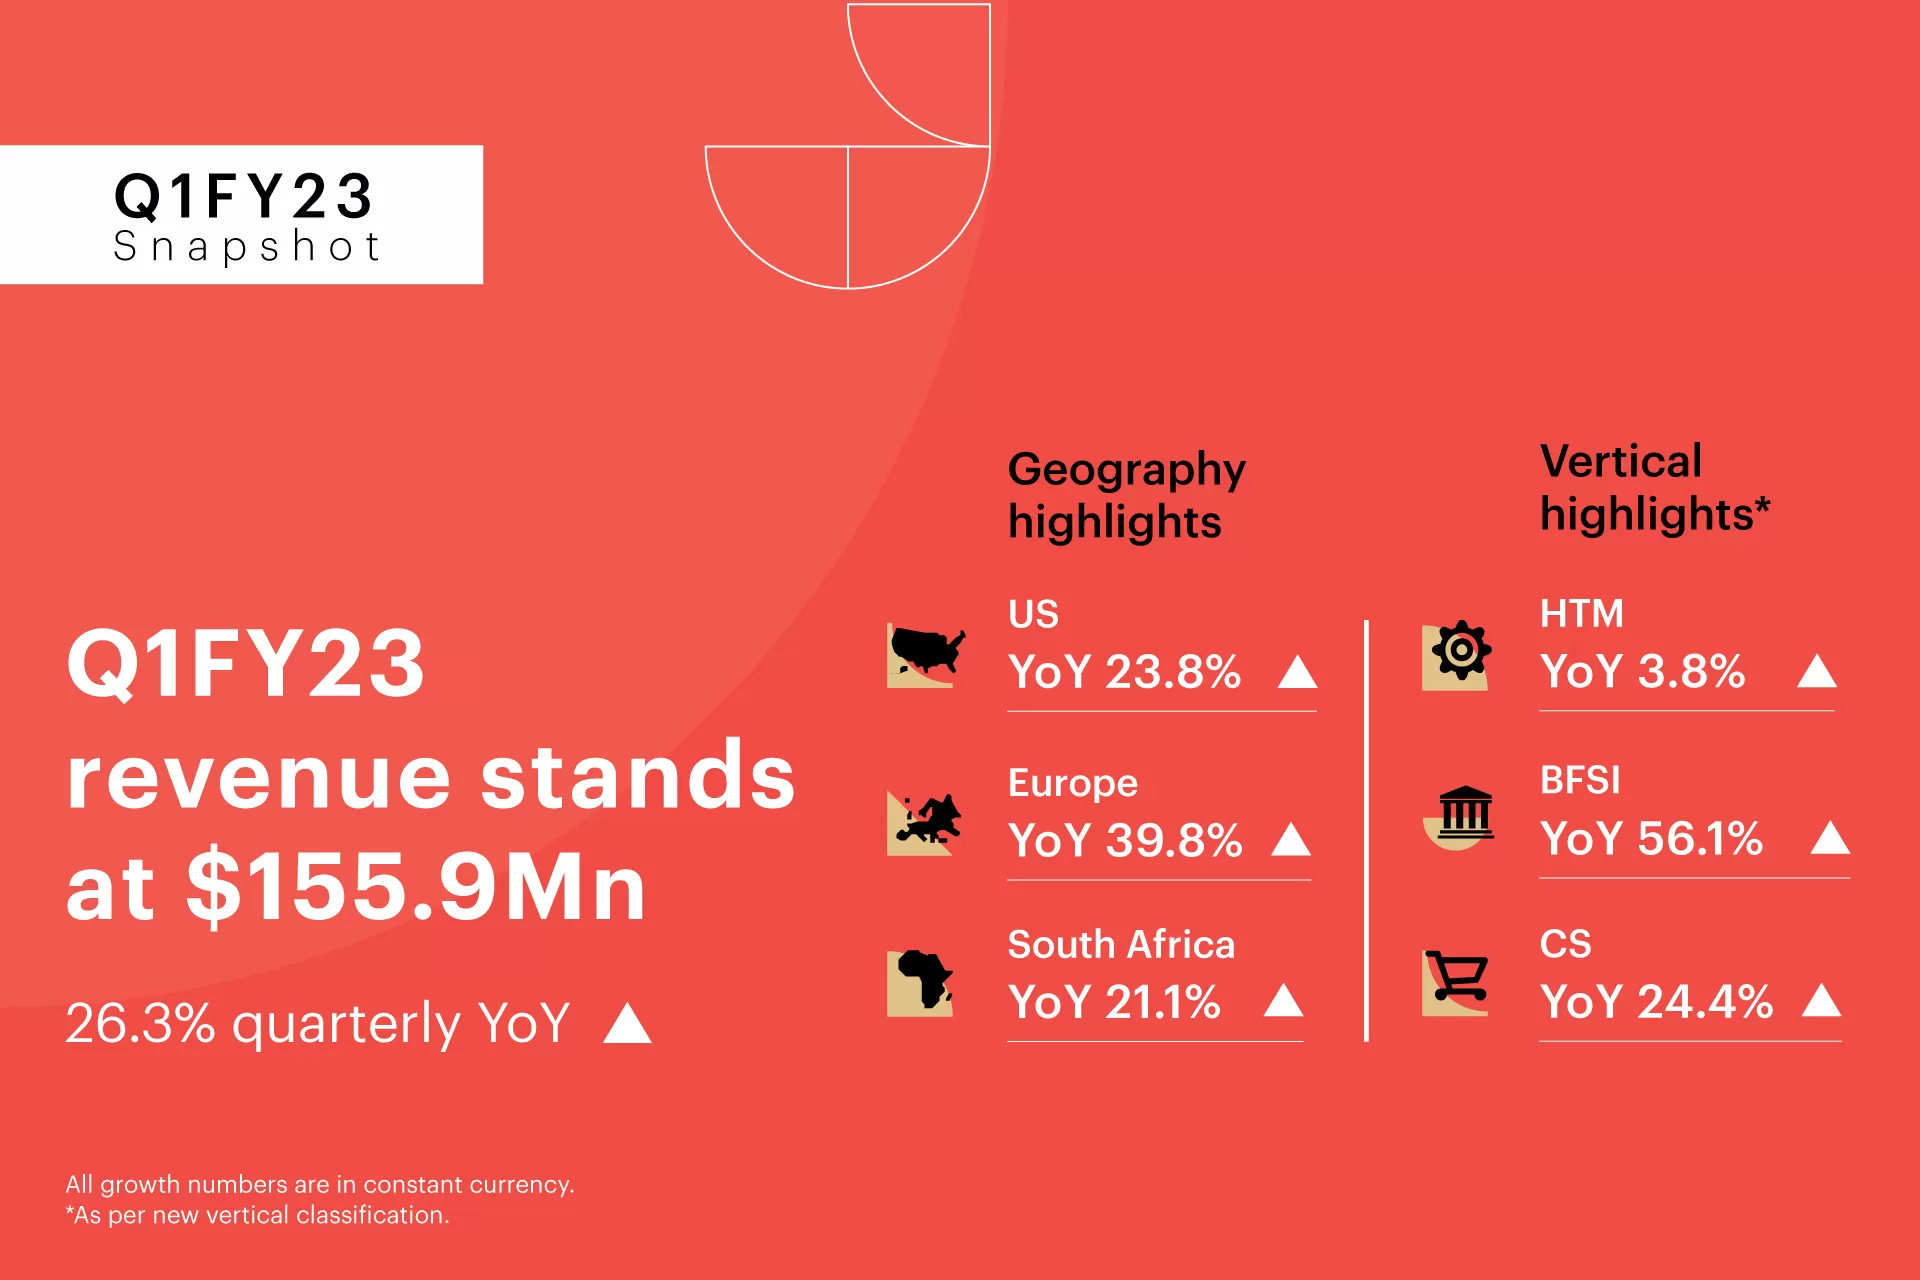 Zensar reports 26.3% quarterly YoY constant currency growth in Q1FY23